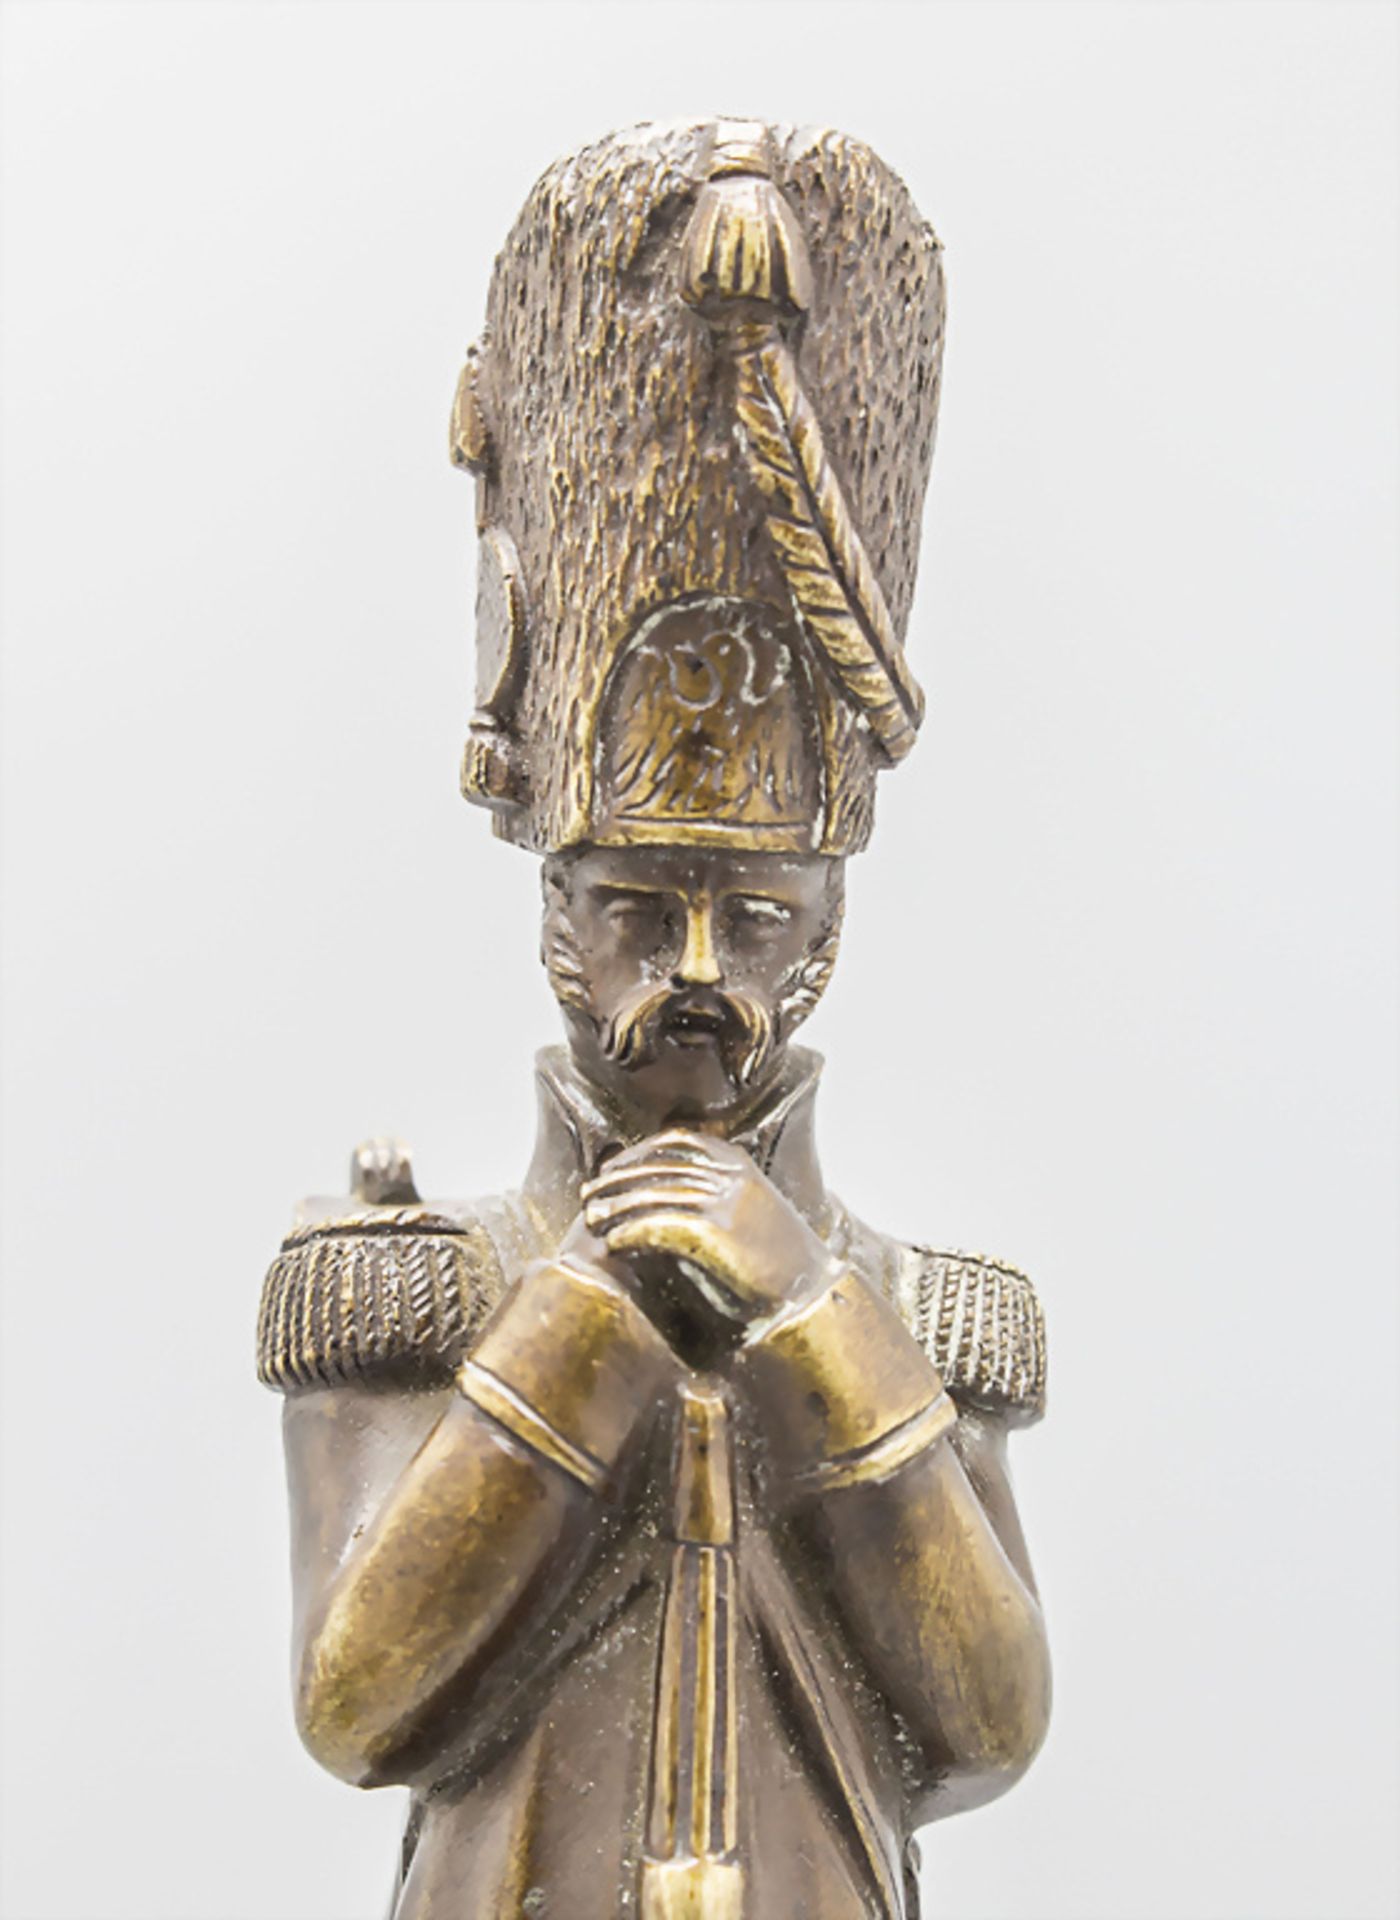 Bronzefigur 'Soldat mit Frau' / A bronze figure of a 'Soldier with wife', Russland, Ende 19. Jh. - Image 7 of 7